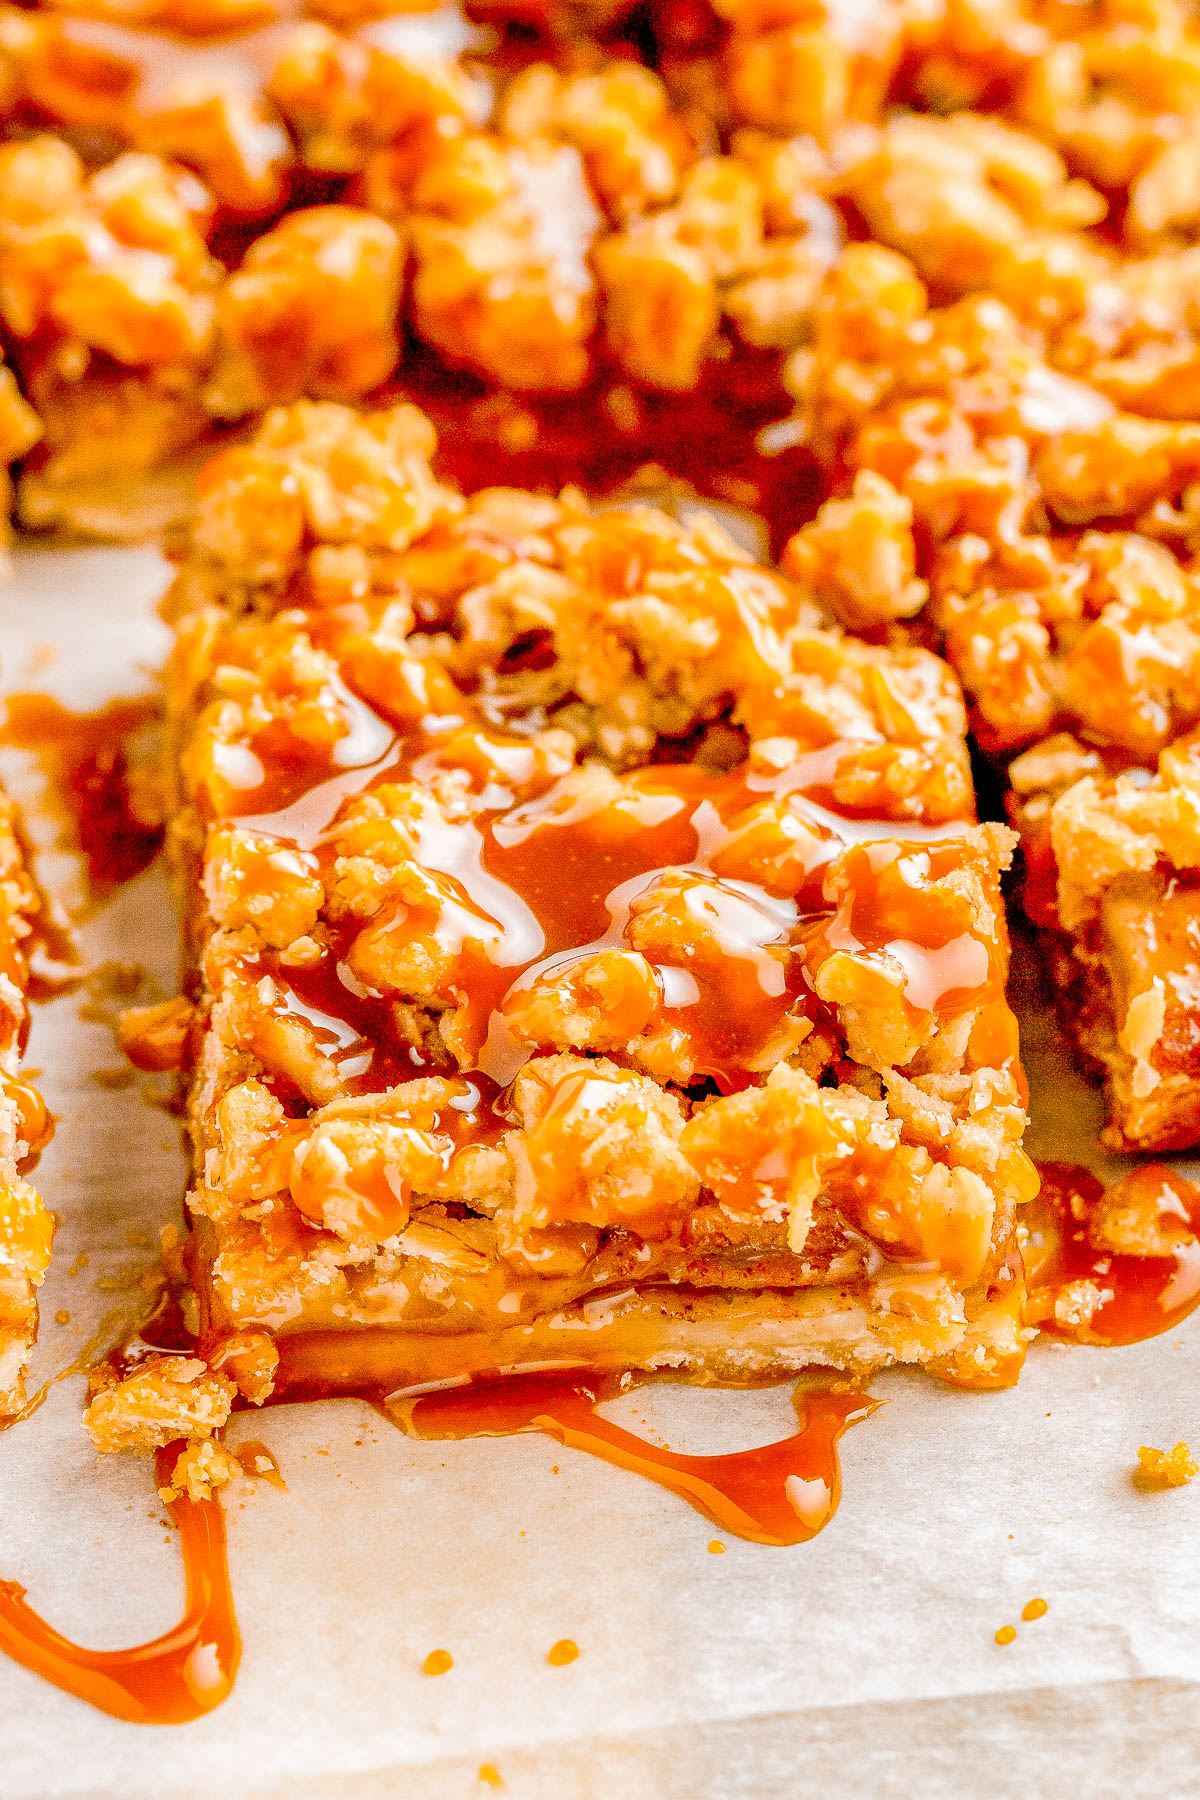 Apple Pie Bars — A flaky, buttery crust is topped with homemade apple pie filling and an oat crumble topping in these INCREDIBLE spiced apple pie bars! Salted caramel sauce is the finishing touch because nothing beats the combination of caramel and apples! Make these EASY, no-mixer bars as written for a smaller gathering, or double it for a party! 